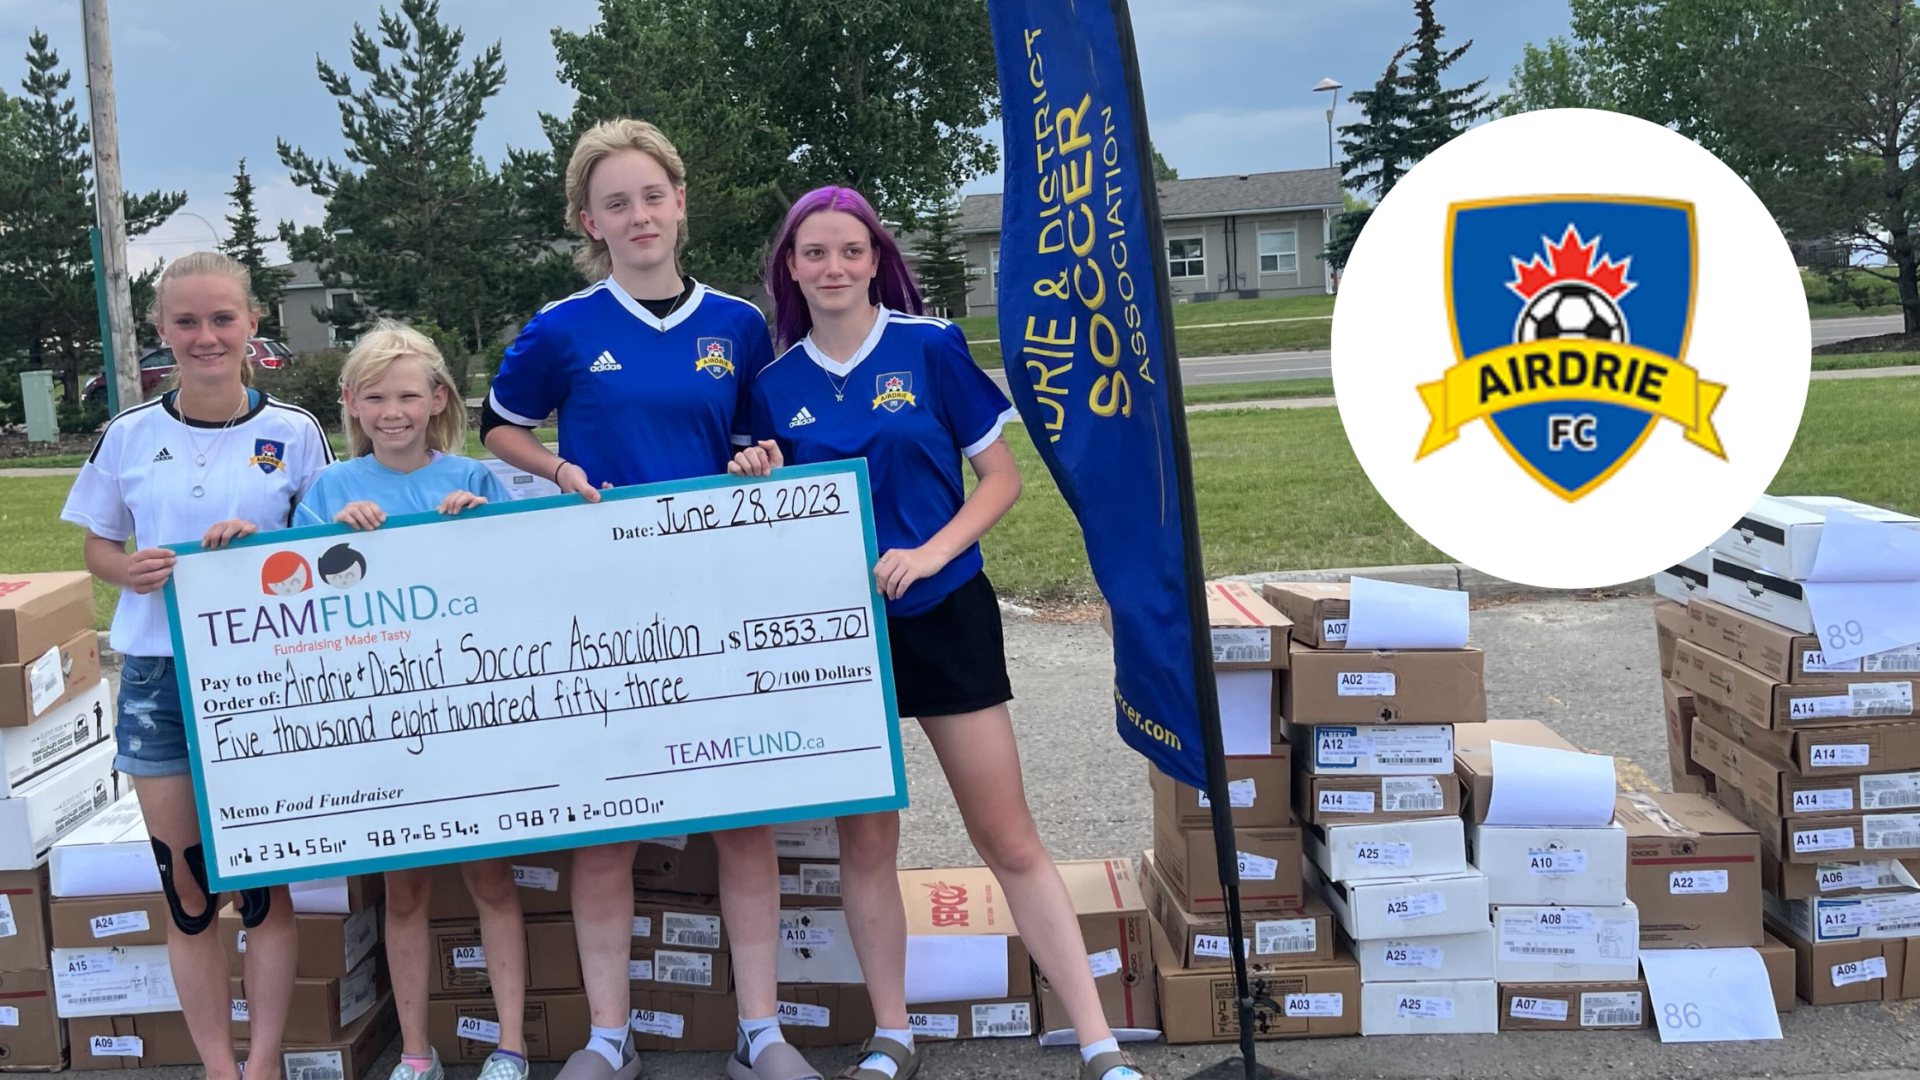 Airdrie & District Soccer raises over $5,800 in Summer Fundraiser